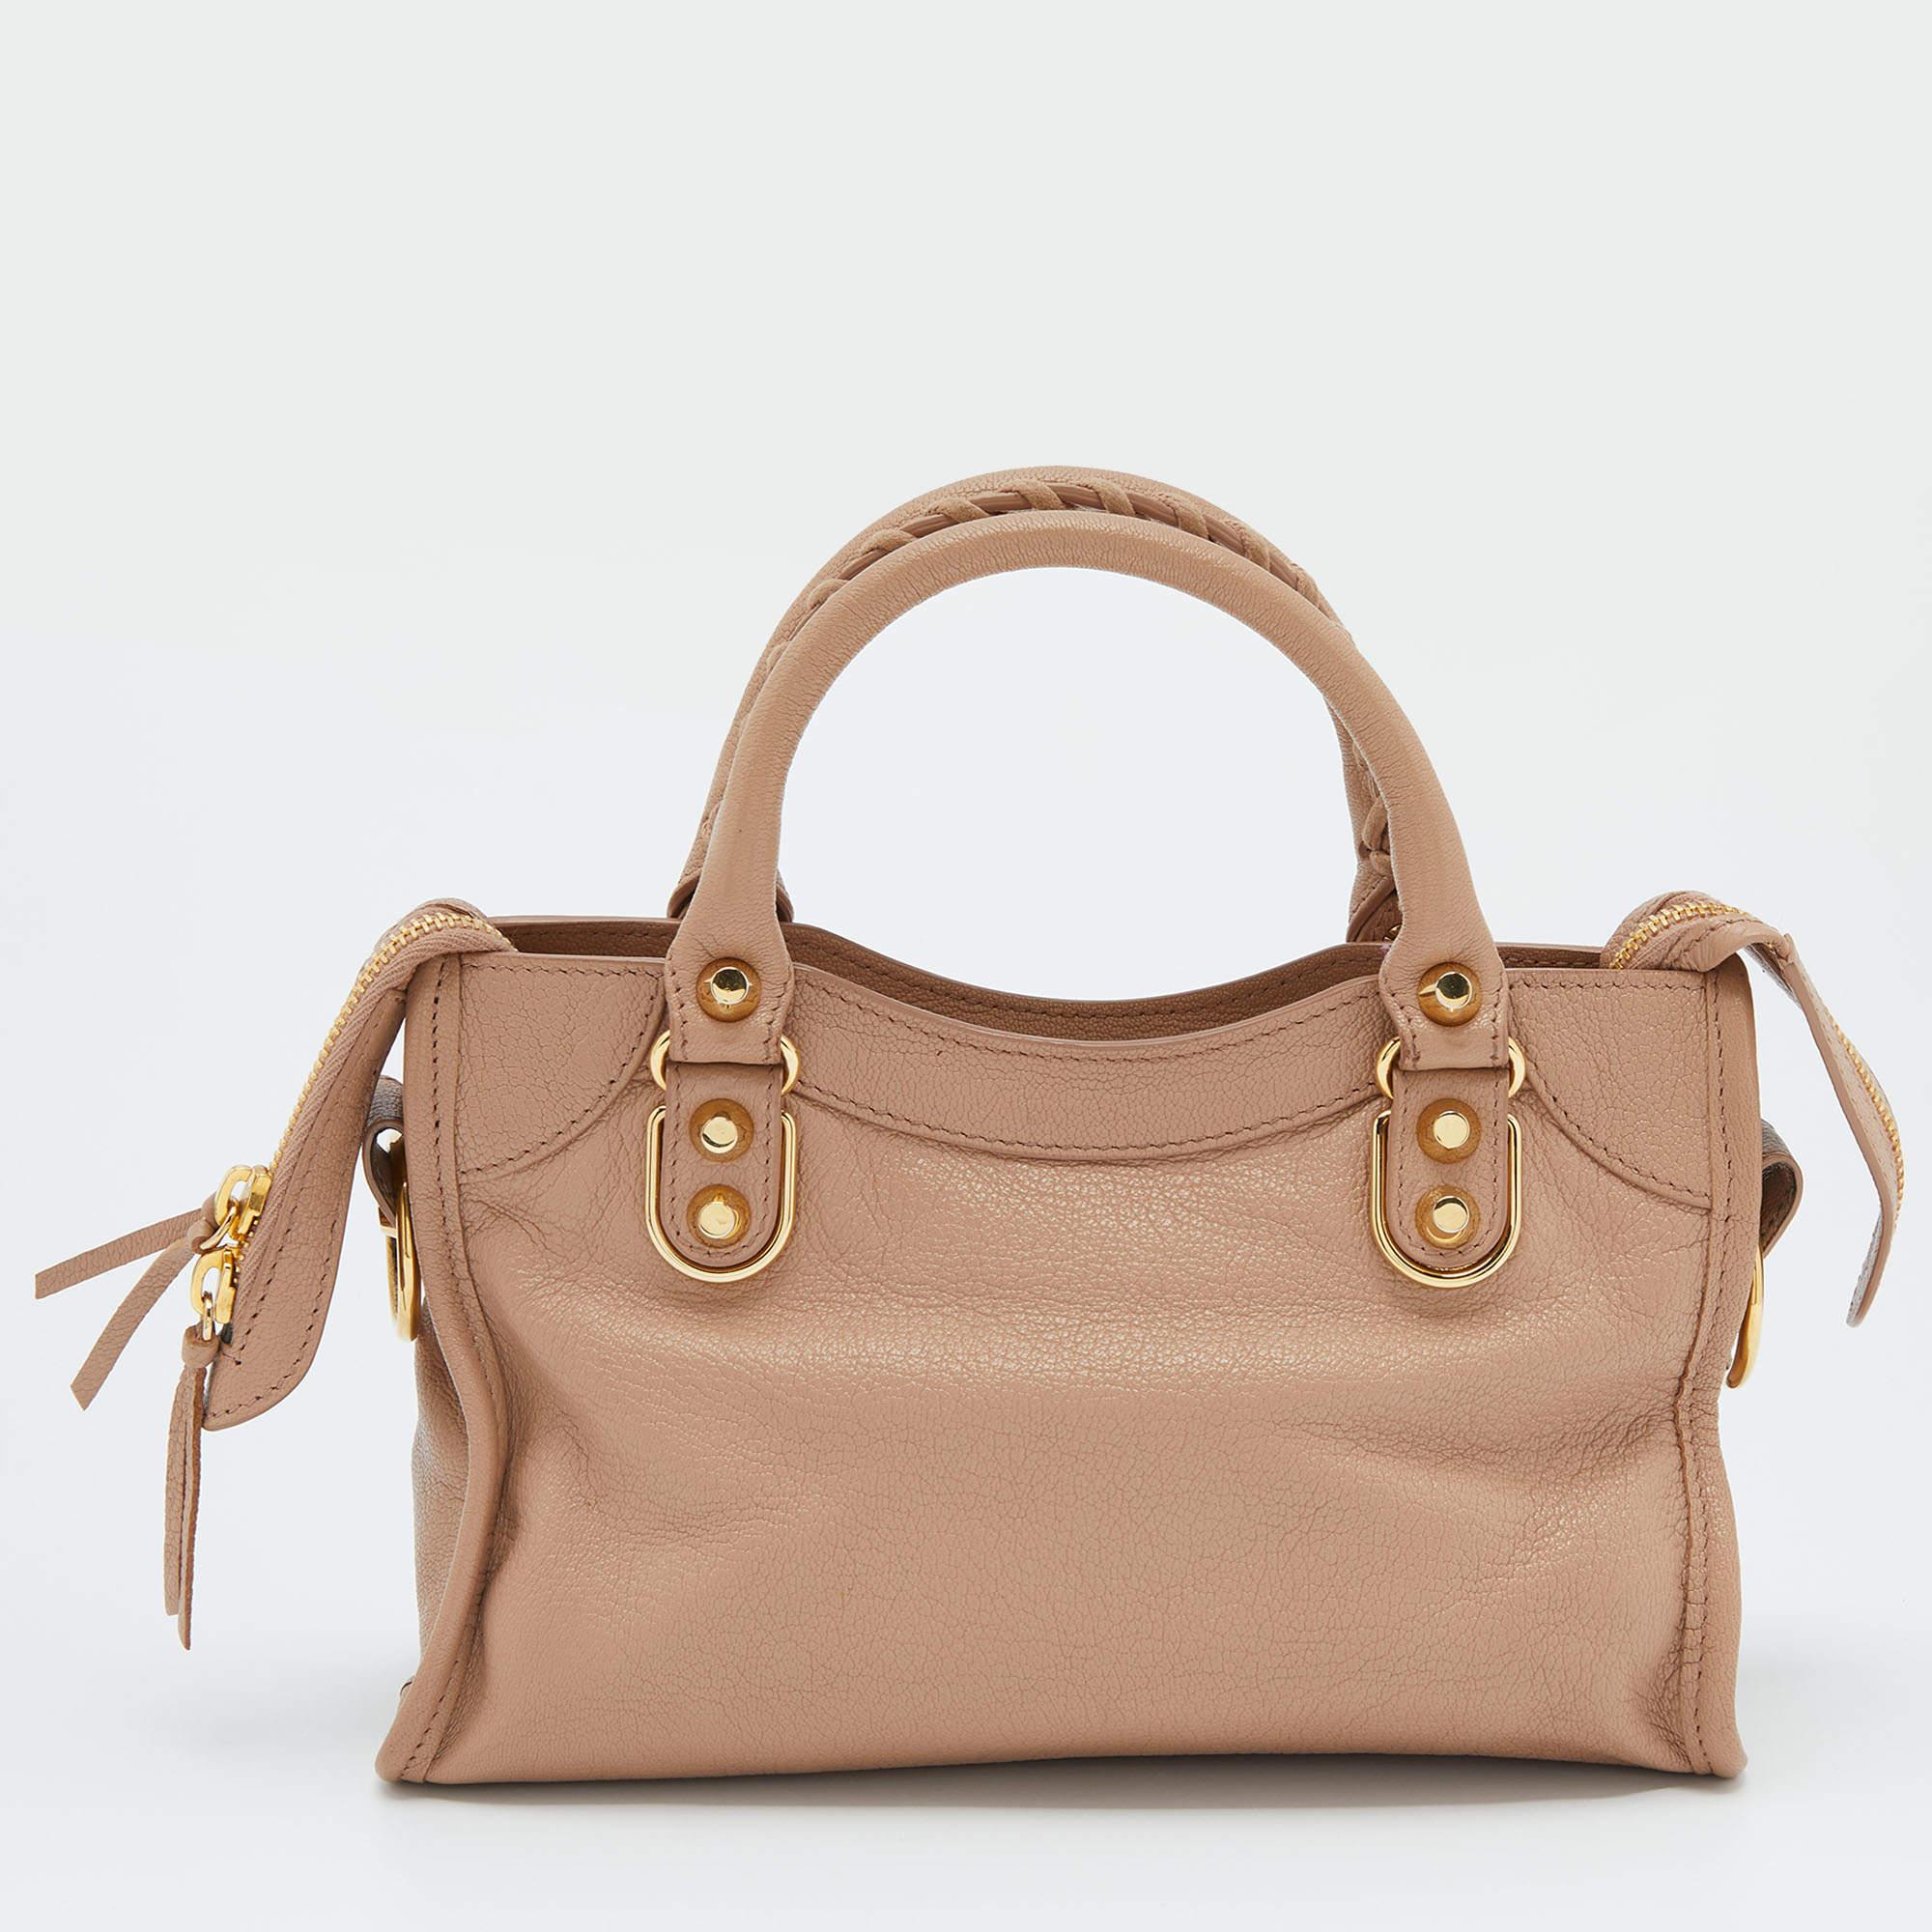 Balenciaga is known for their finely made products and the City bags are one of them. Effortless and stylish, this City leather bag will be your go-to for multiple occasions. It has the signature details of buckles, studs and the front zipper in